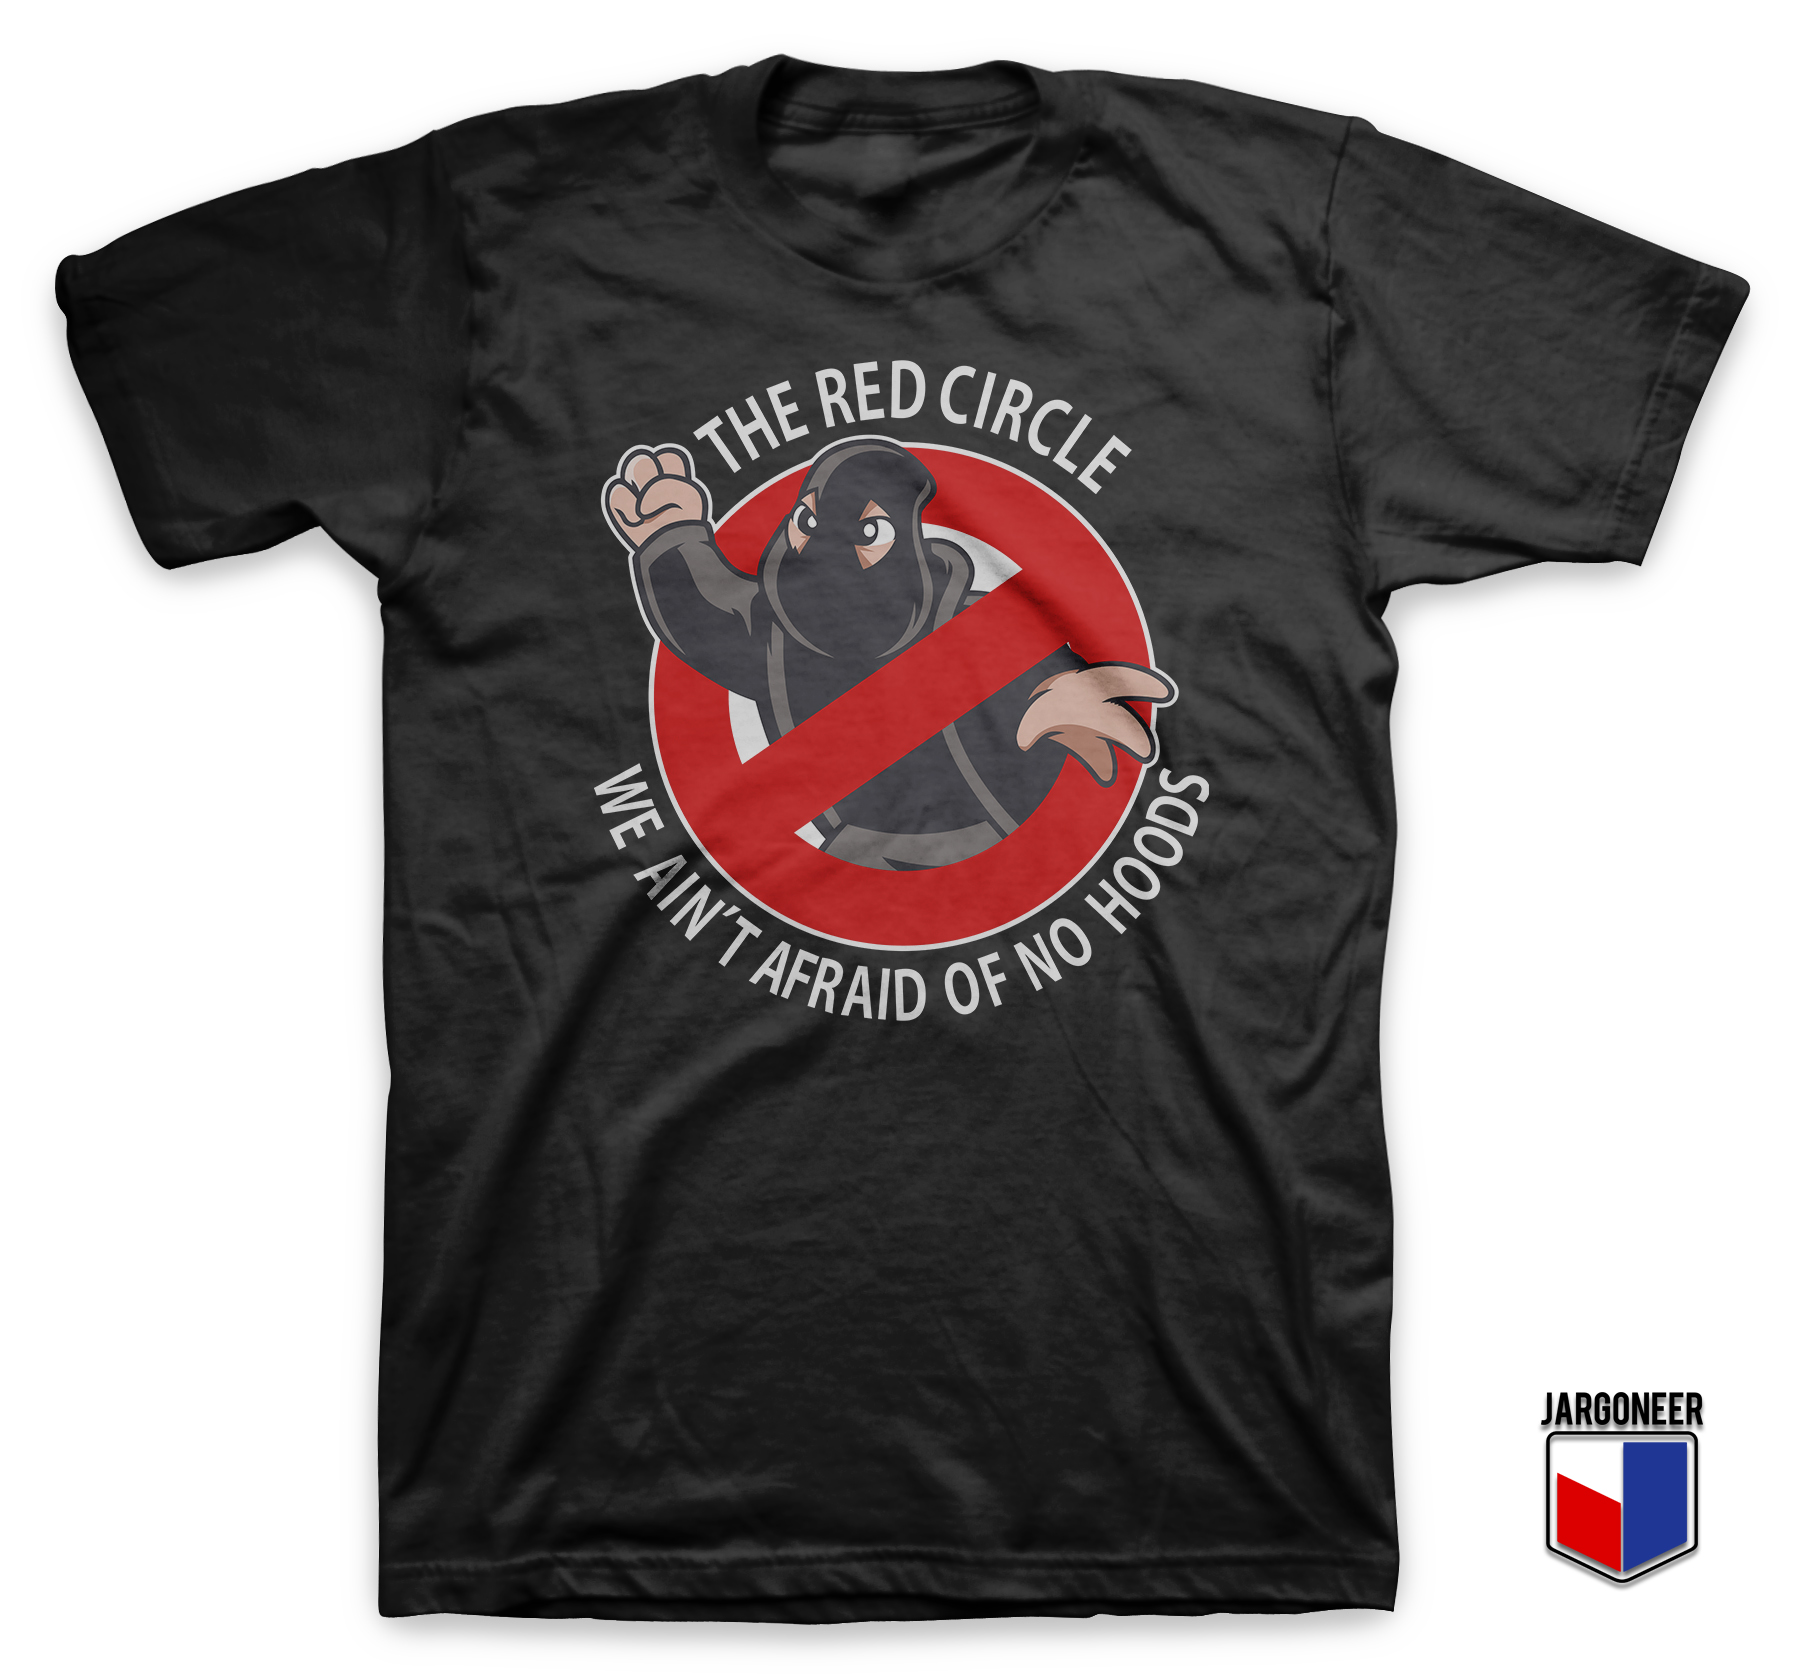 The Red Circle Not Afraid Of No Hoods Black T Shirt - Shop Unique Graphic Cool Shirt Designs